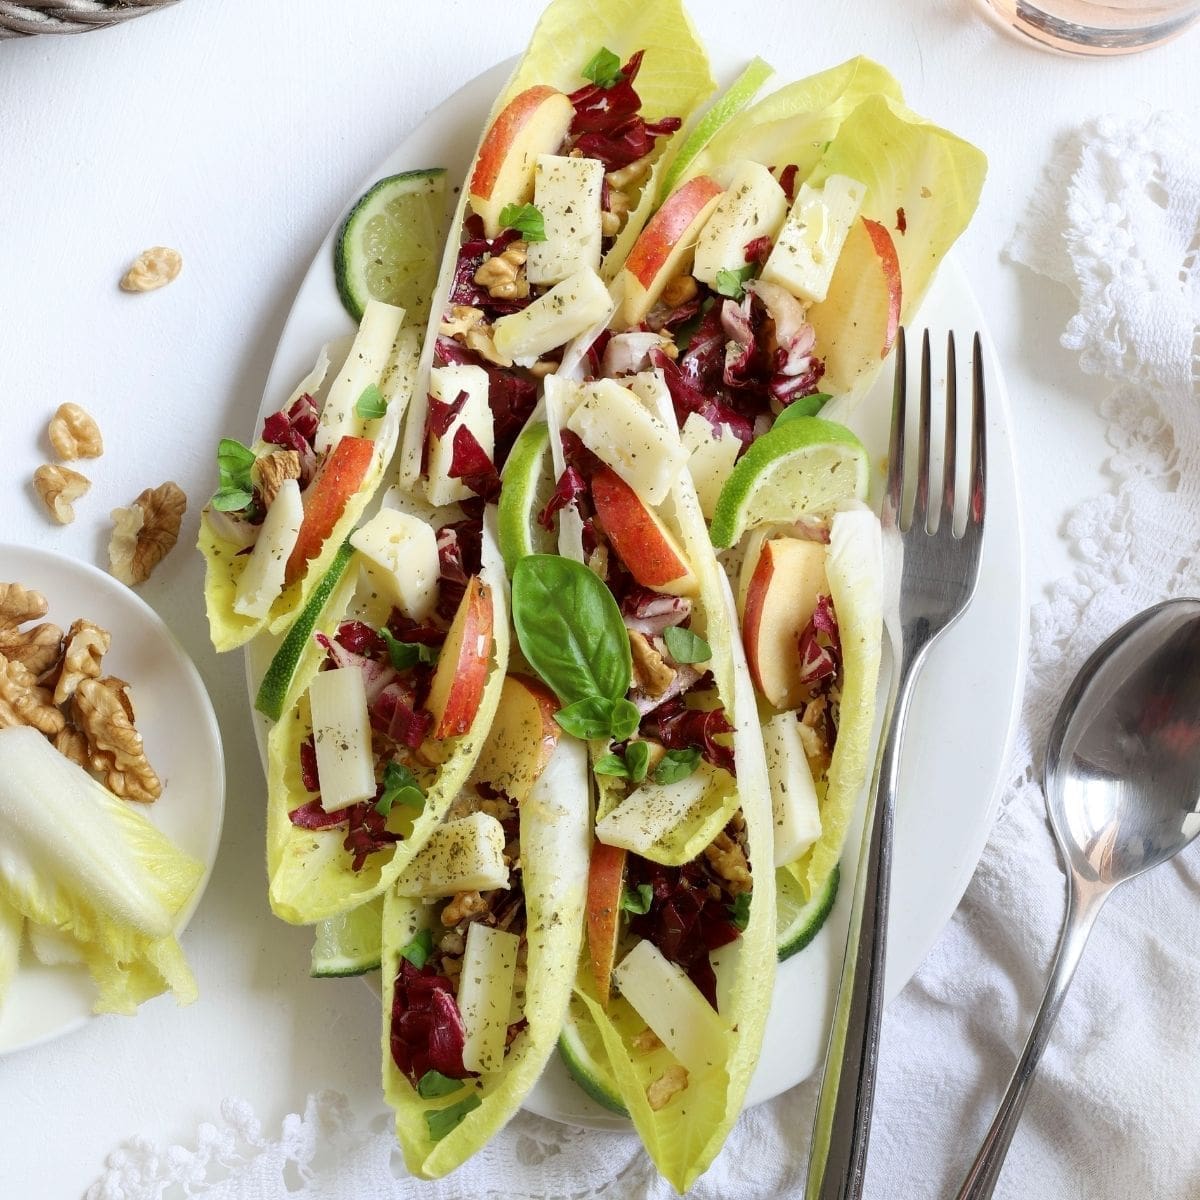 🥬 11 BEST Endive Appetizers That Will Brighten Up Your Table! 🥬